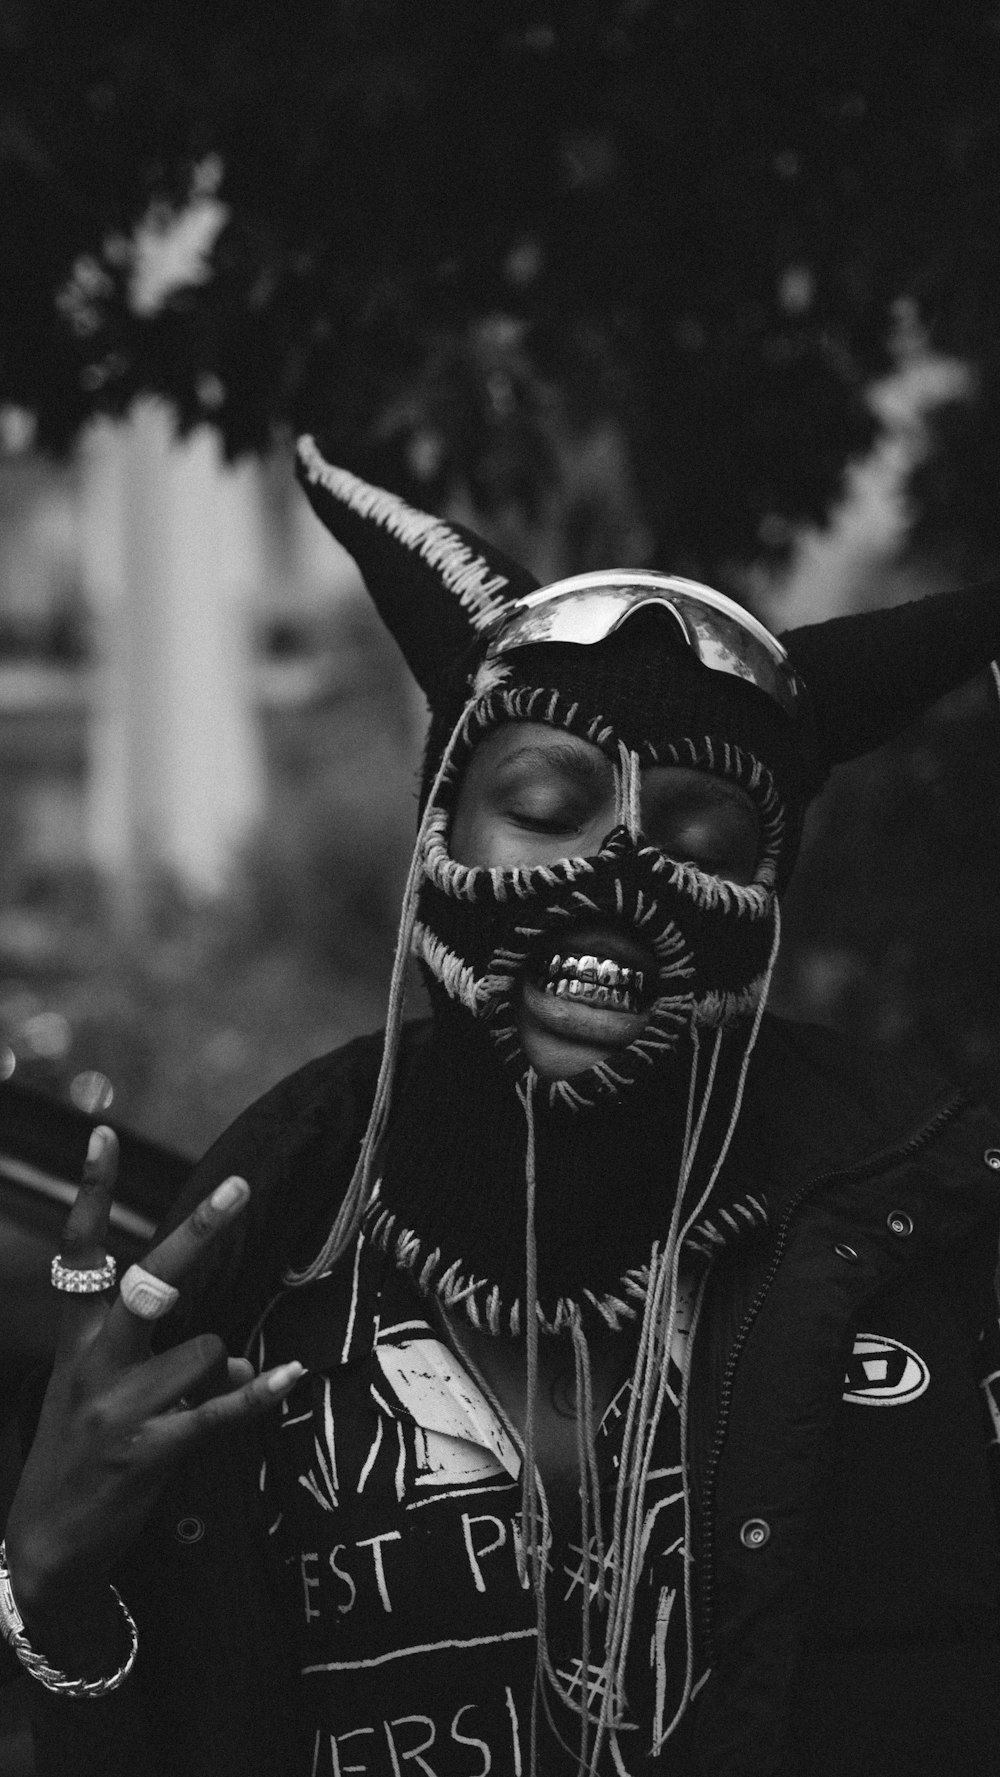 a person wearing a horned mask and smoking a cigarette